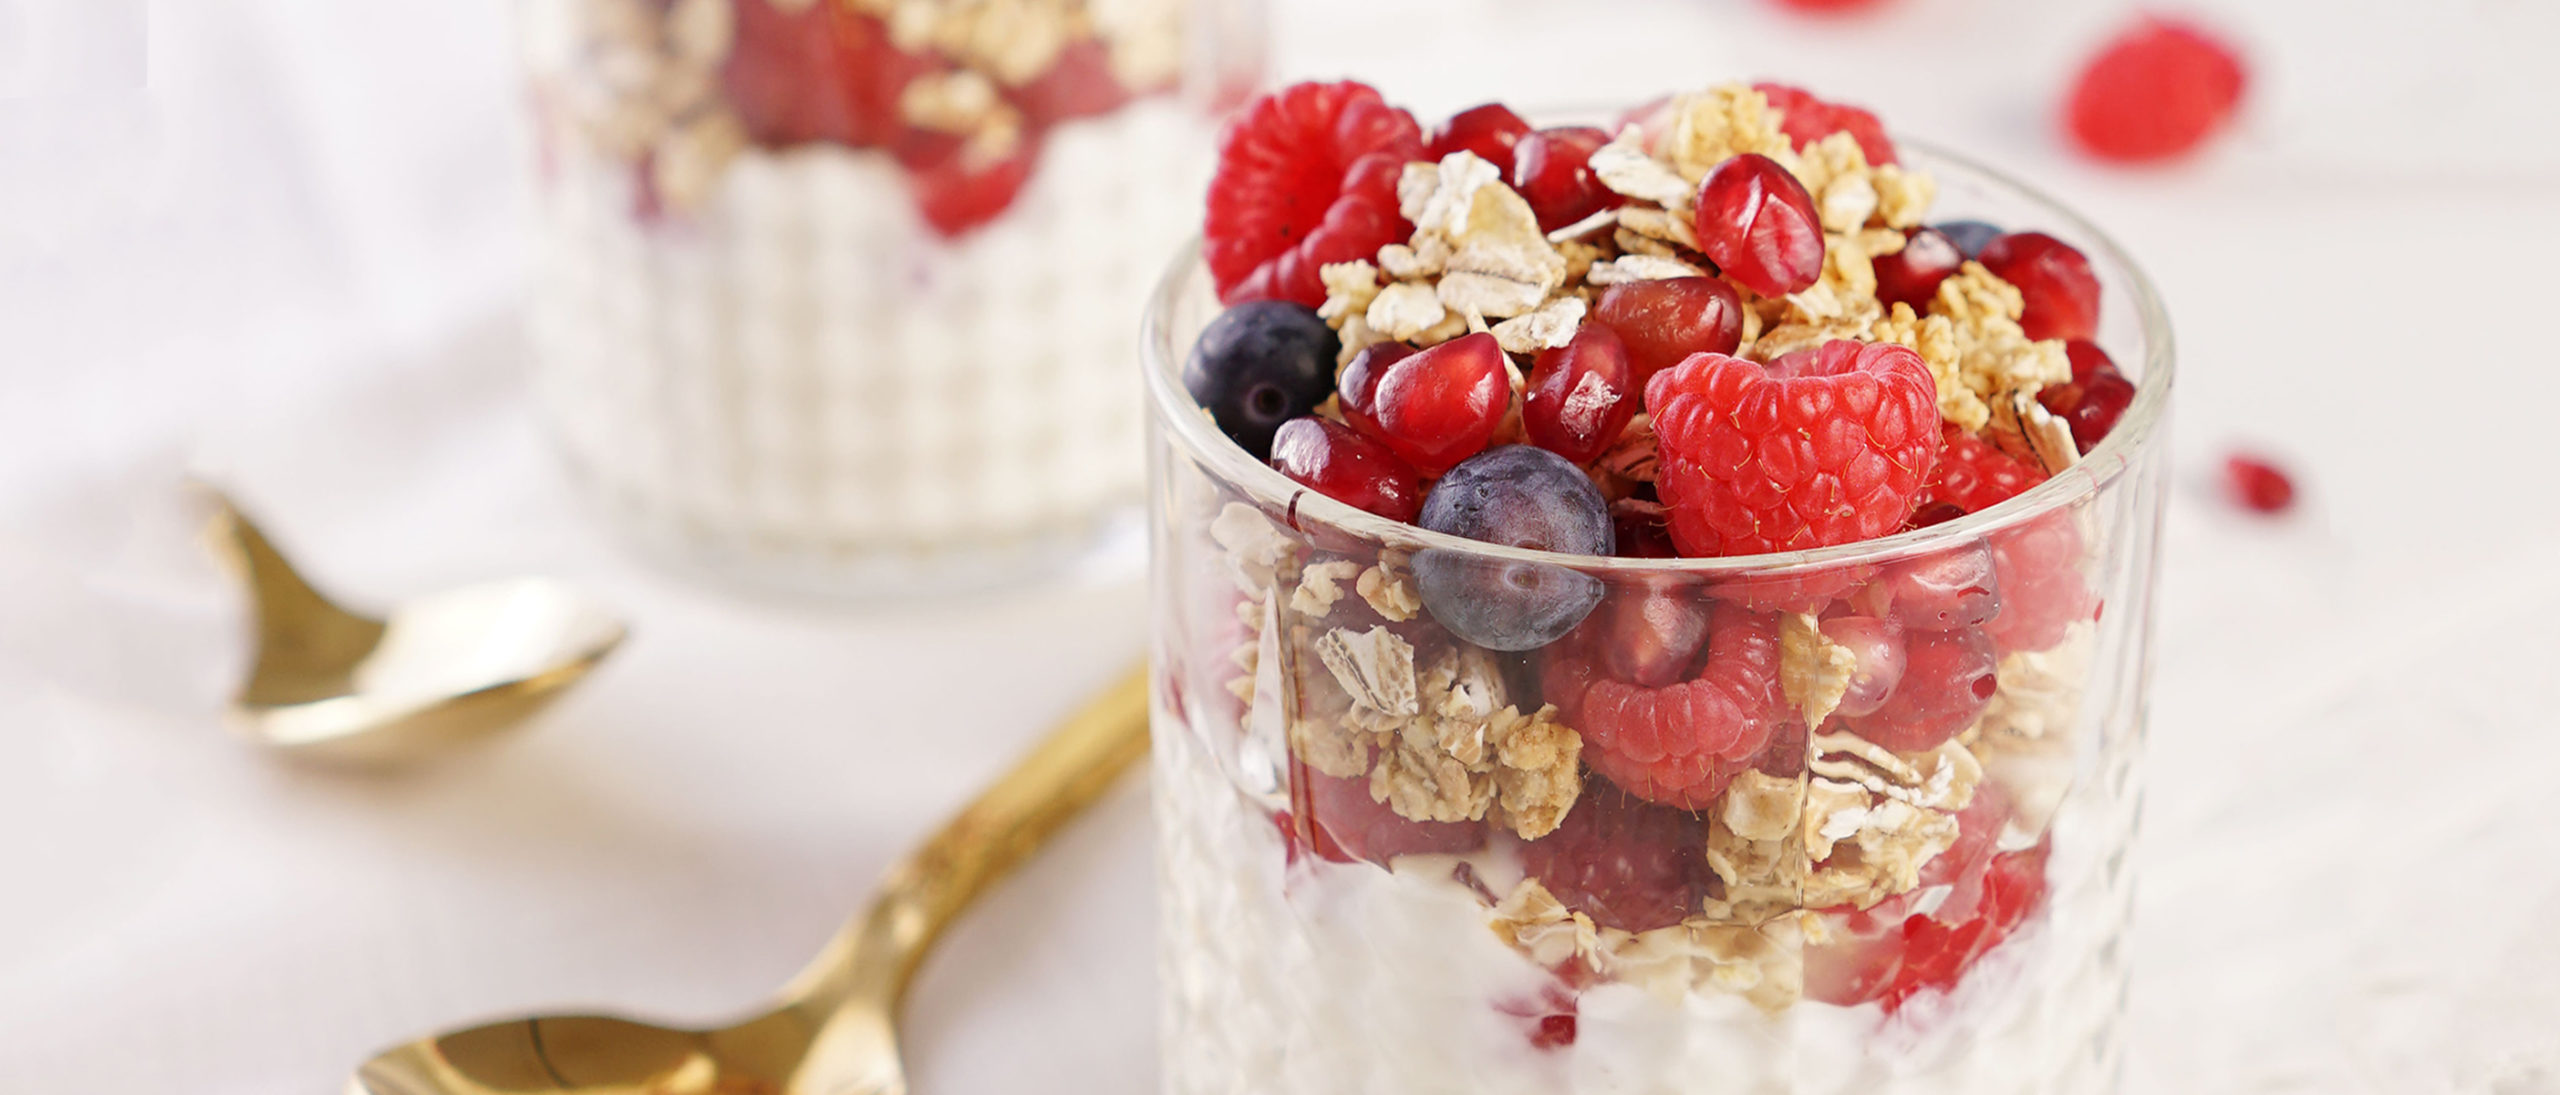 Jumpstart Your Day With 6 Delicious Overnight Oat Recipes